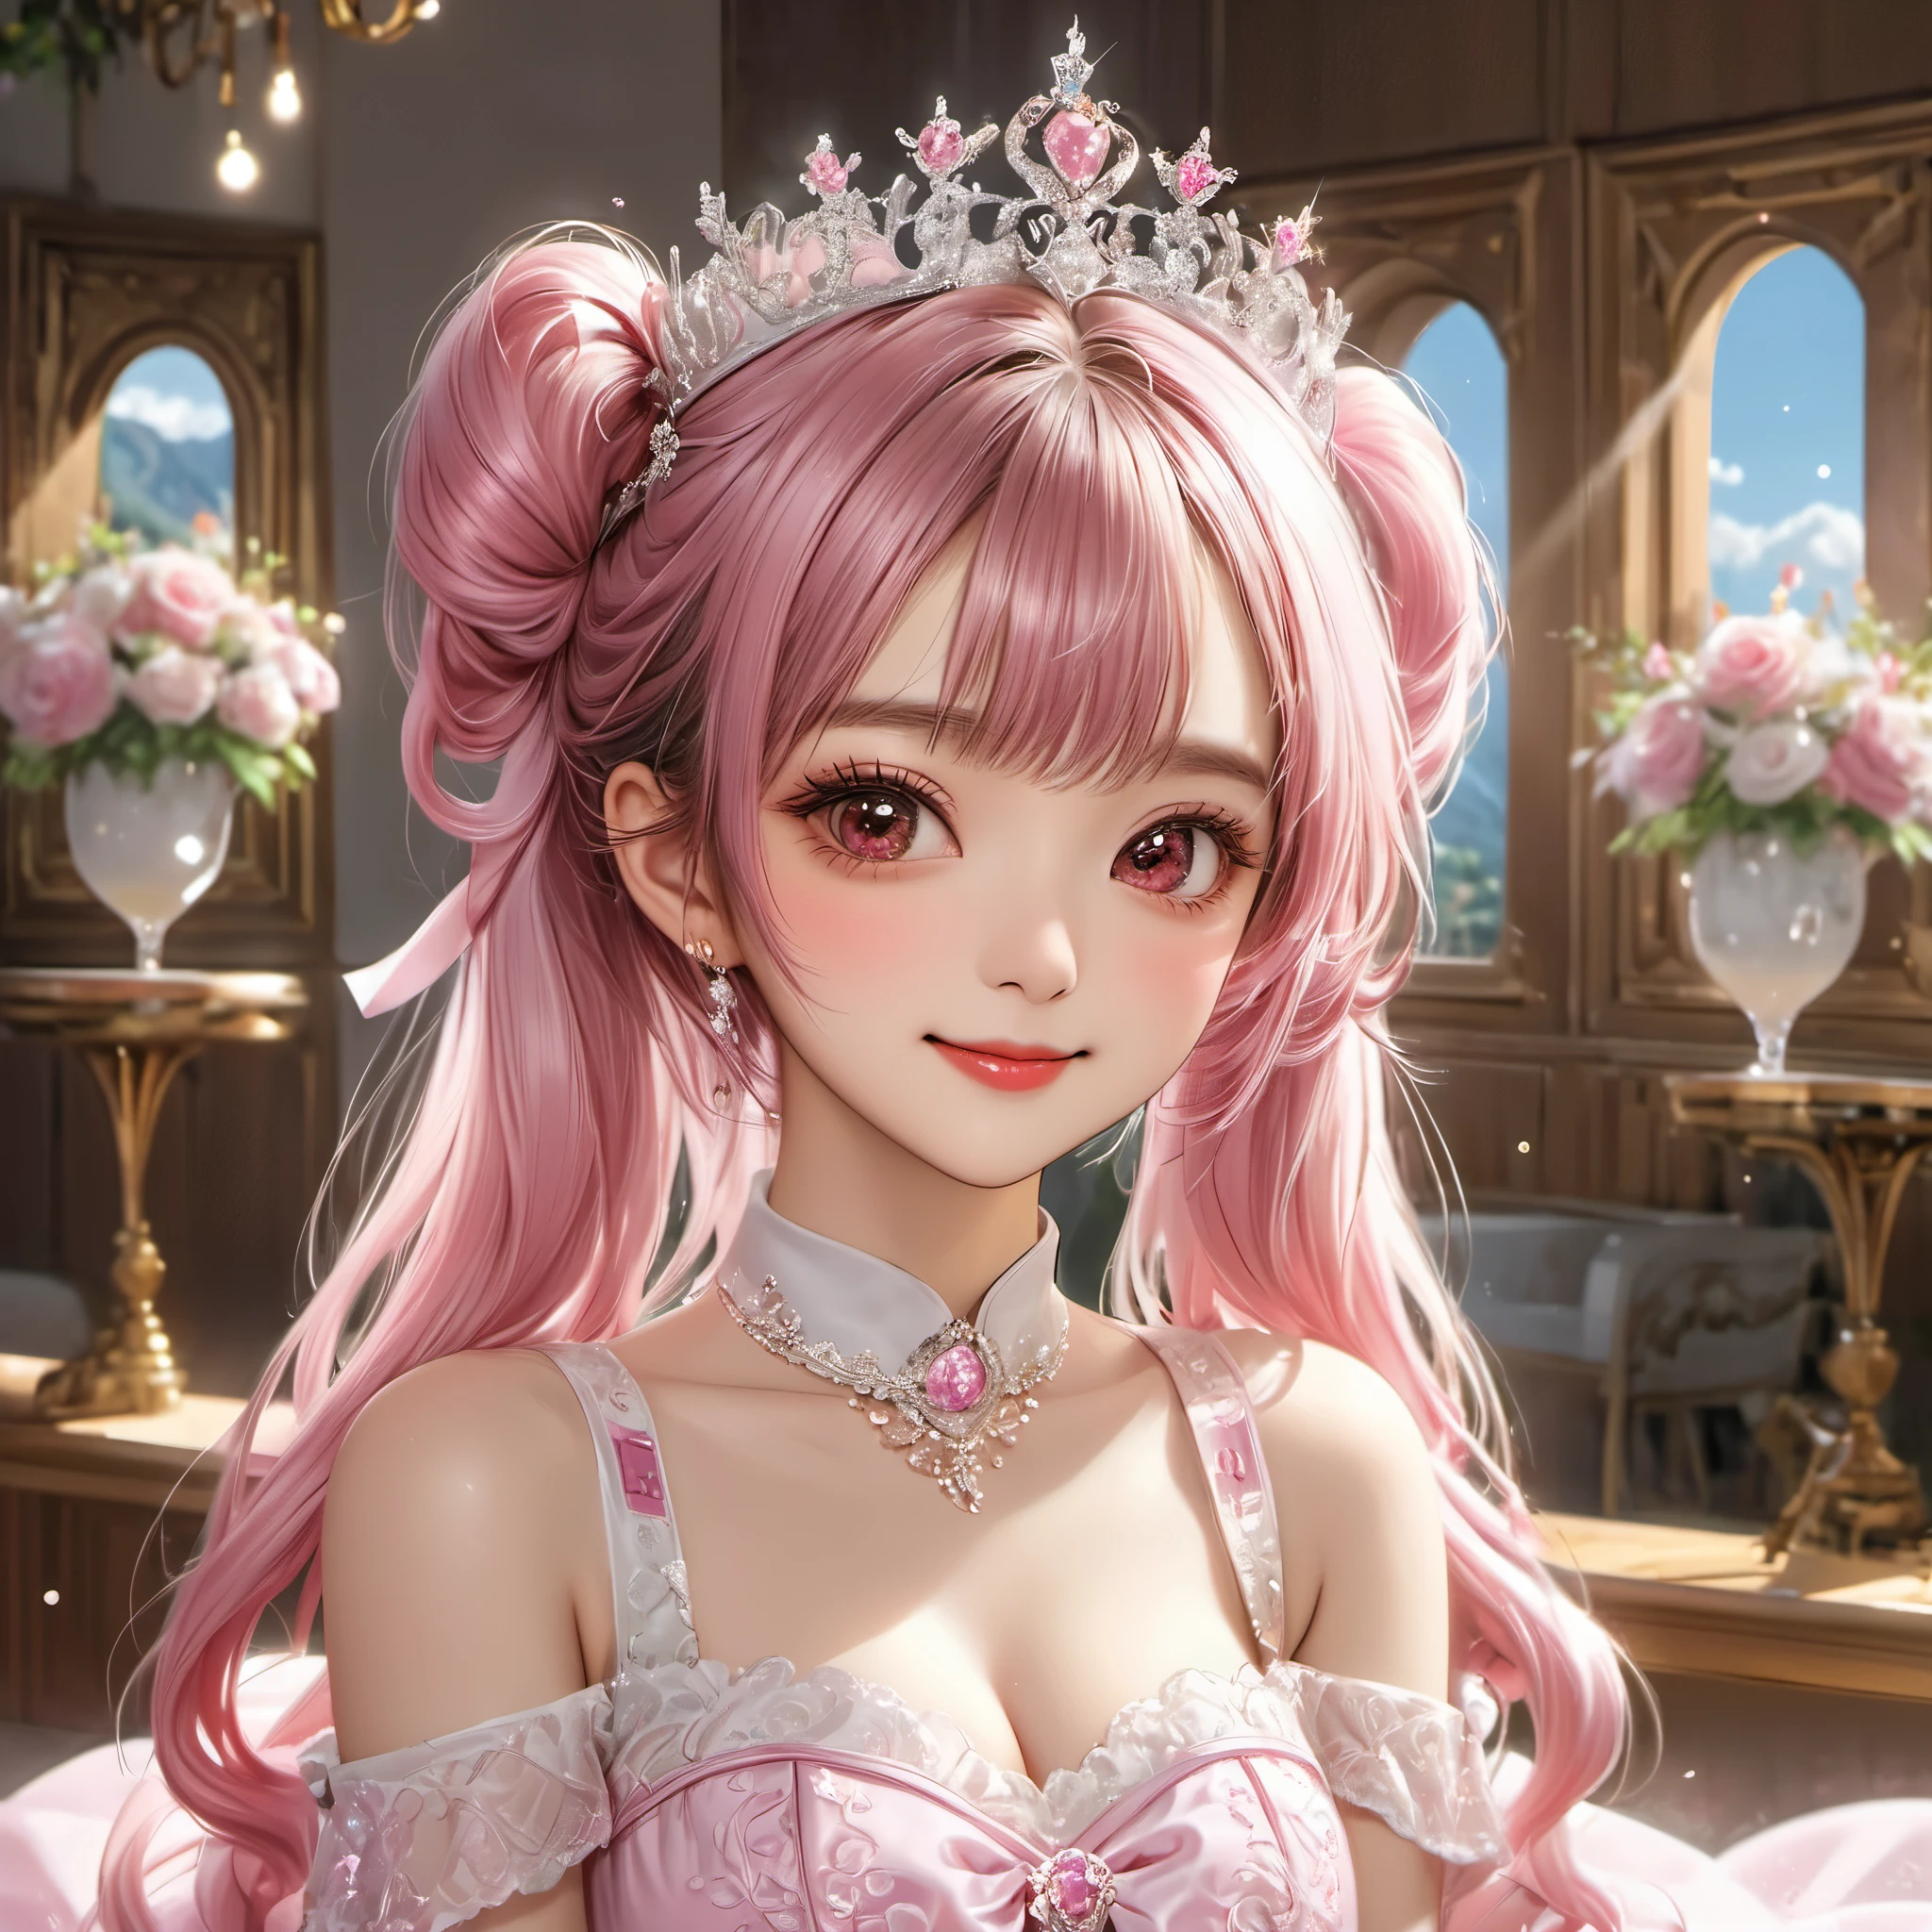 (Breathtaking and beautiful lighting:1.2), (1 Girl:1.3), (Solo:1.5), sixteen years old, (shiny white skin), (pastel pink hair, twin tail hair, Bangs:1.3), (Beautiful pink eyes, adolable big drooing eyes, wink, close one eye:1.5), (Breathtaking Beautiful white Princess Dresses with Luxurious Details, super precision embroidery See-through lace, cute ribbon, super precision embroidery a lot of see-through frill, corset belt, mermaid-line skirt, super precision embroidery silver thread, Diamond), (big bust:1.3), (beautifully Luxurious Diamonds Tiara), (happy smile, Beautiful smile, Gentle smile, cute smile, innocent smile like an angel:1.2), Attractive, amazing, Beautiful, Elegant, Luxurious, magnifica, Eye-catching, the ultimate beauty, Supreme Beauty, Superlative beauty, Elegant, Beauty, Graceful, Everyone loves it, Beauty that fascinates everyone, Healed, The highest level of complete beauty, cute like an idol, Stylish like a fashion model, Goddess-like grace, Be loved, cute little, adolable, Look at the camera, cute little pose, Happy, (Upper body:1.5), (breathtaking scenery, Breathtakingly beautiful Luxurious Princess room, champagne, wine:1.5),